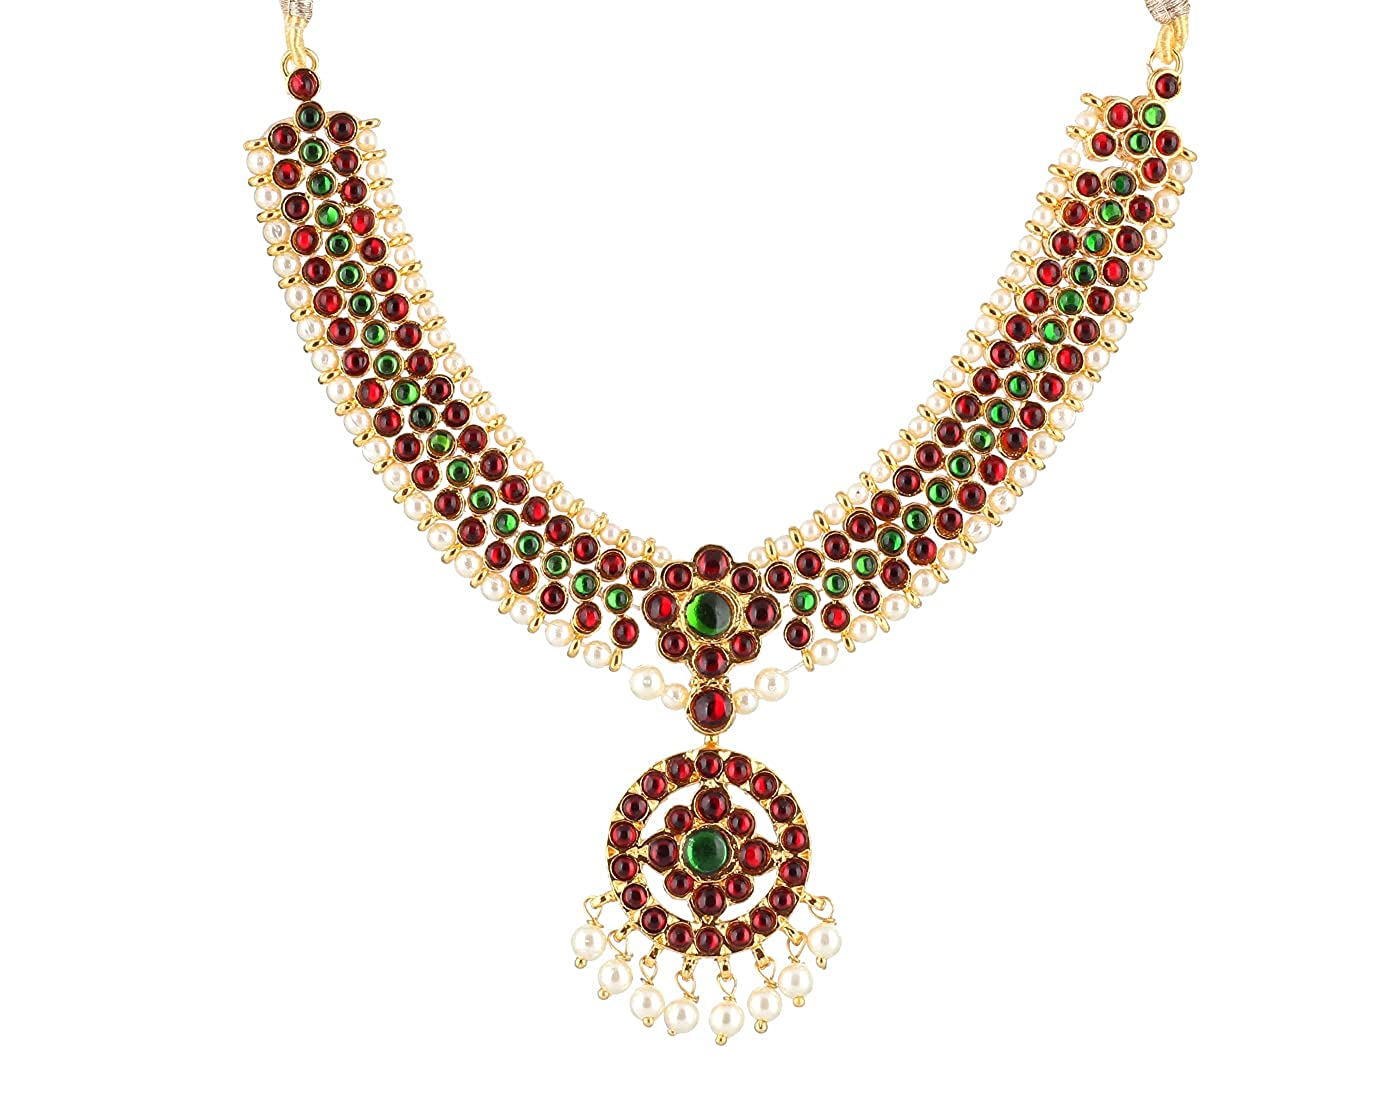 Exquisite Bharatanatyam Necklace - Golden Collections